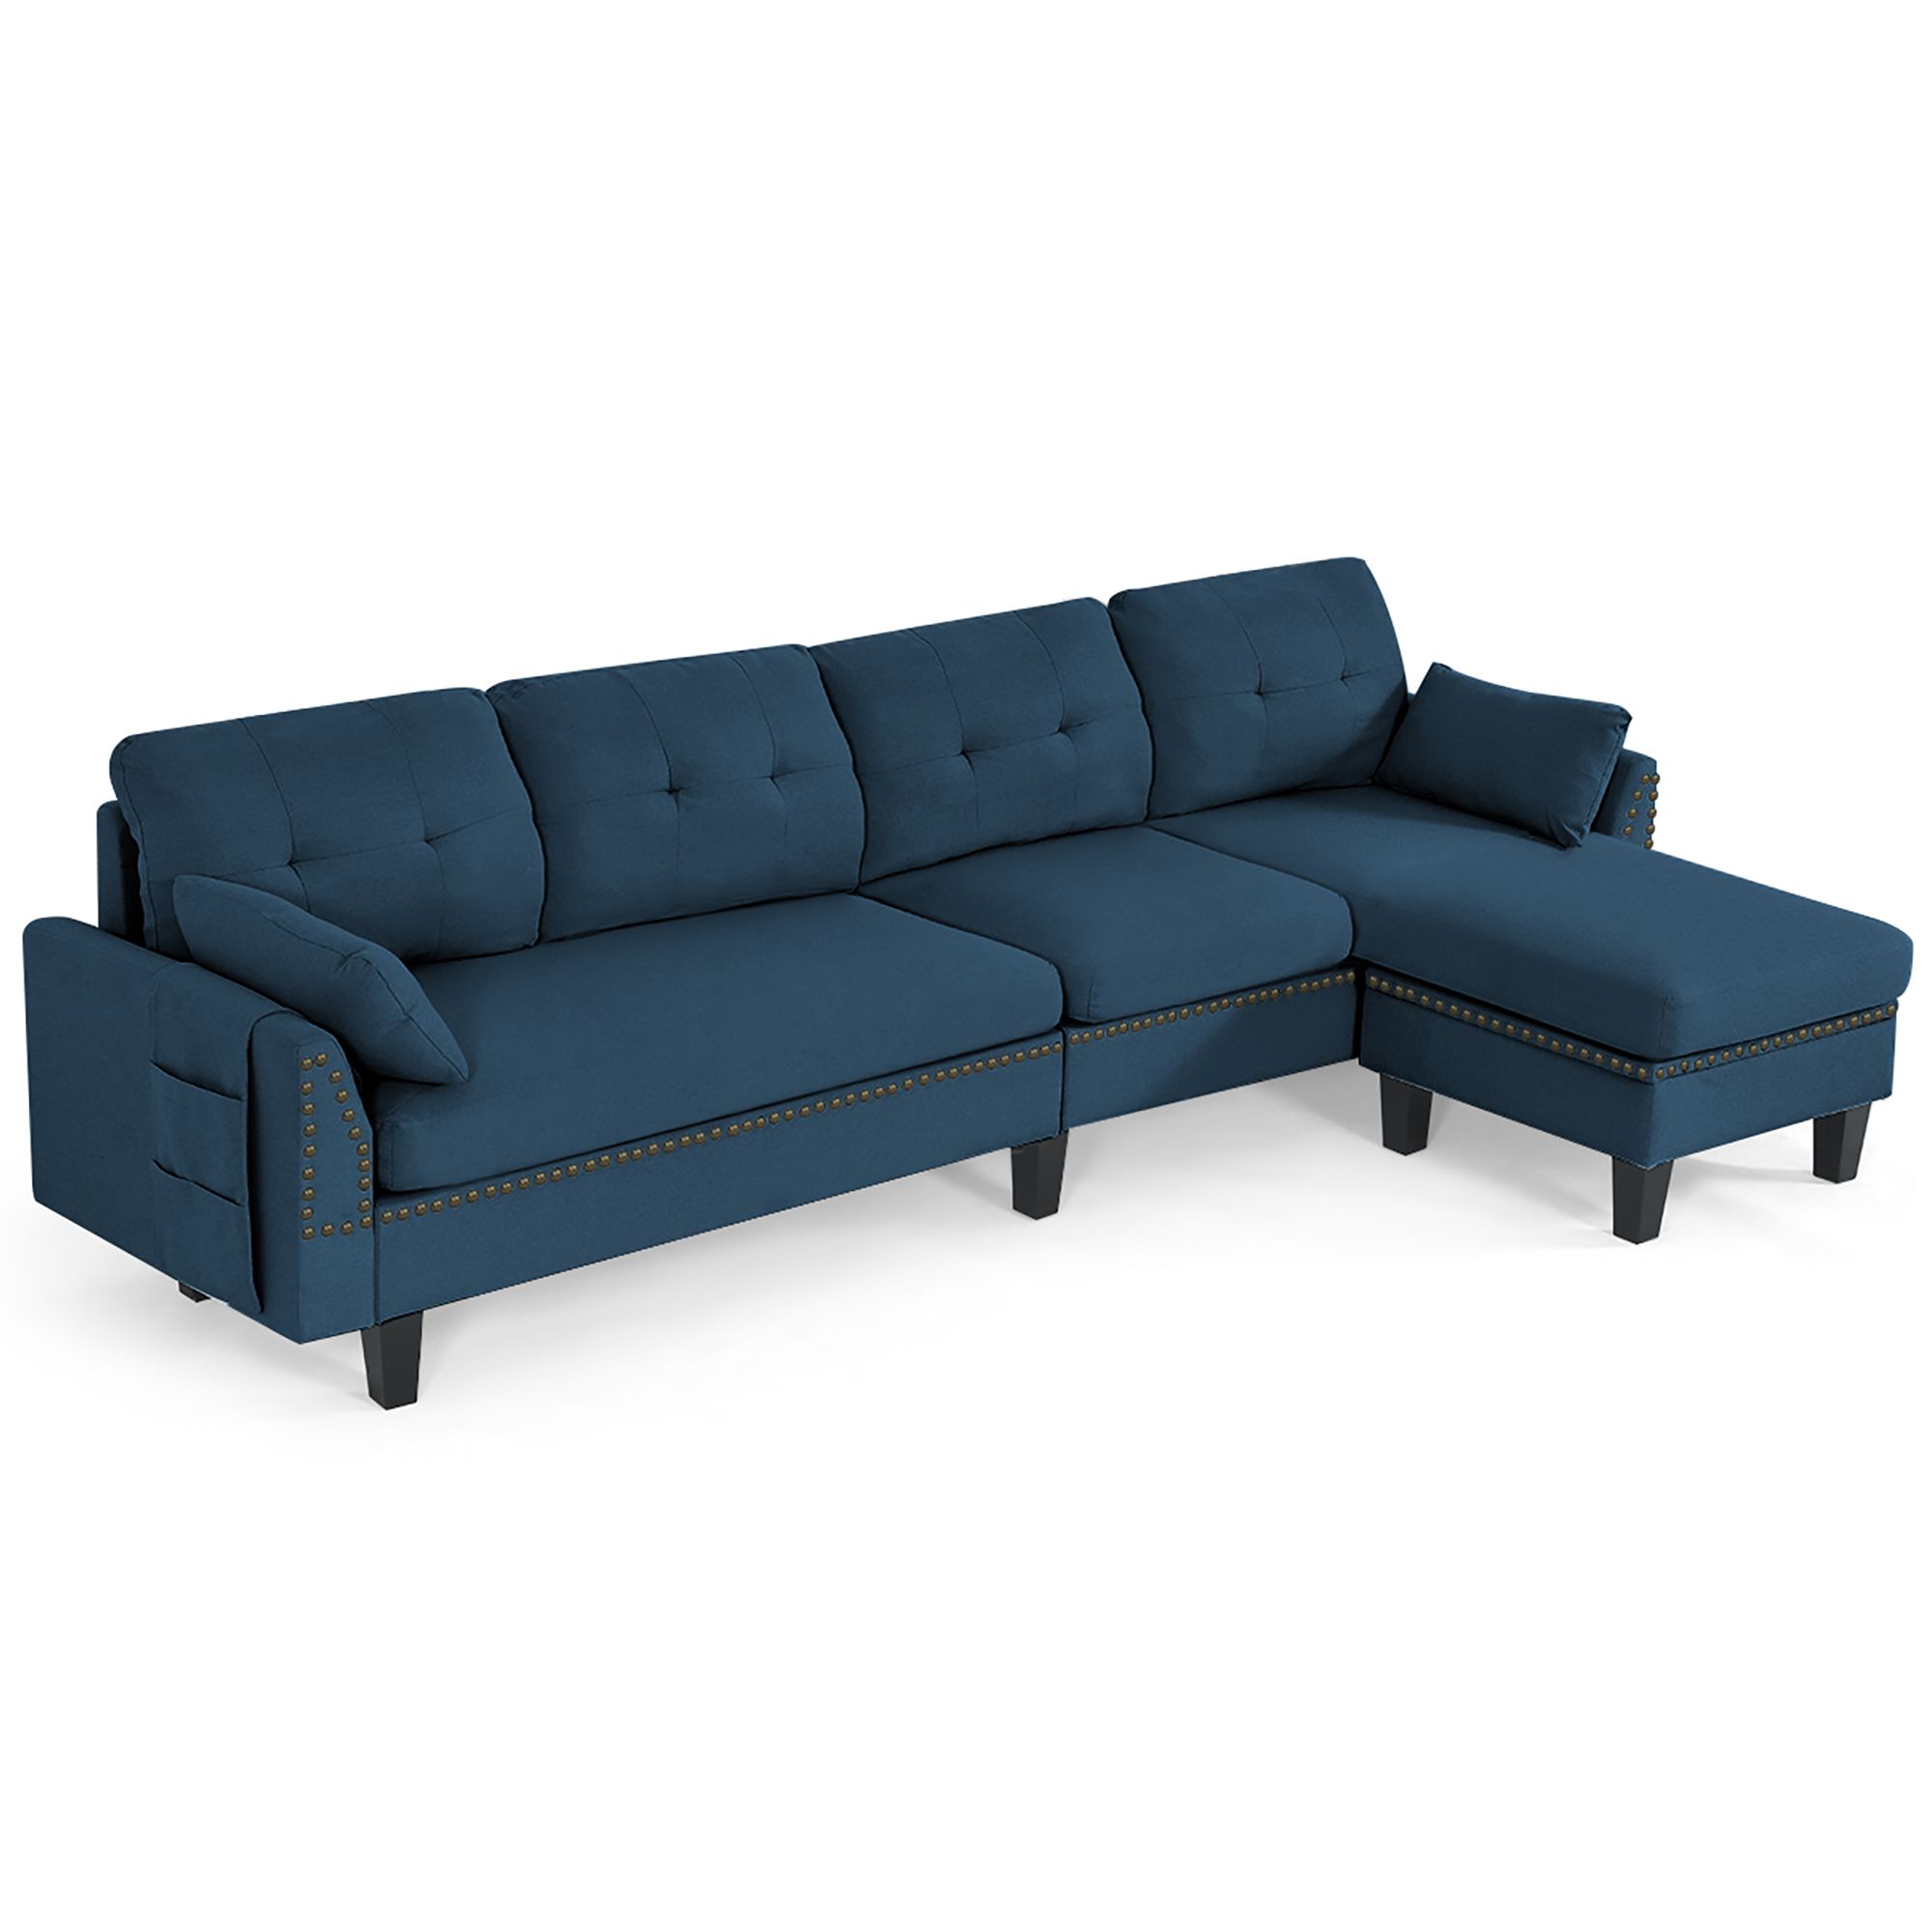 Costway Convertible Sectional Sofa Couch 4 Seat L Shaped Within Convertible Sofas (View 13 of 15)